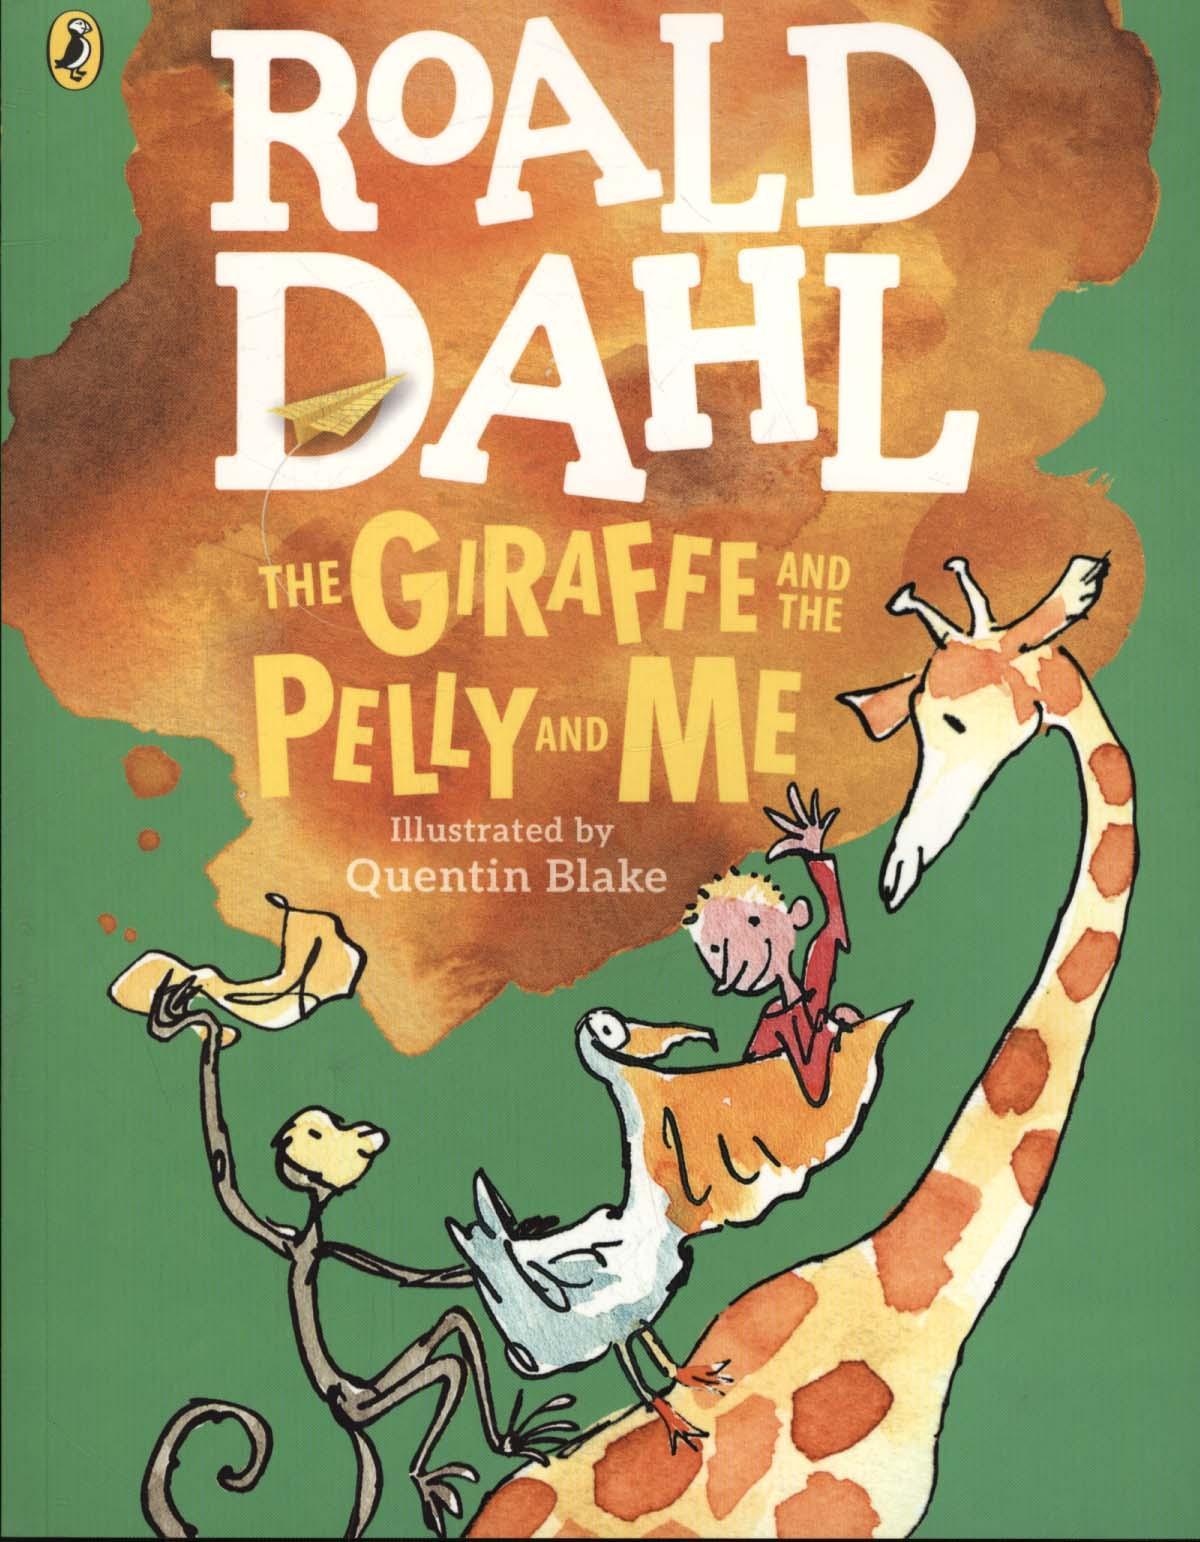 Giraffe and the Pelly and Me (Colour Edition) - Roald Dahl